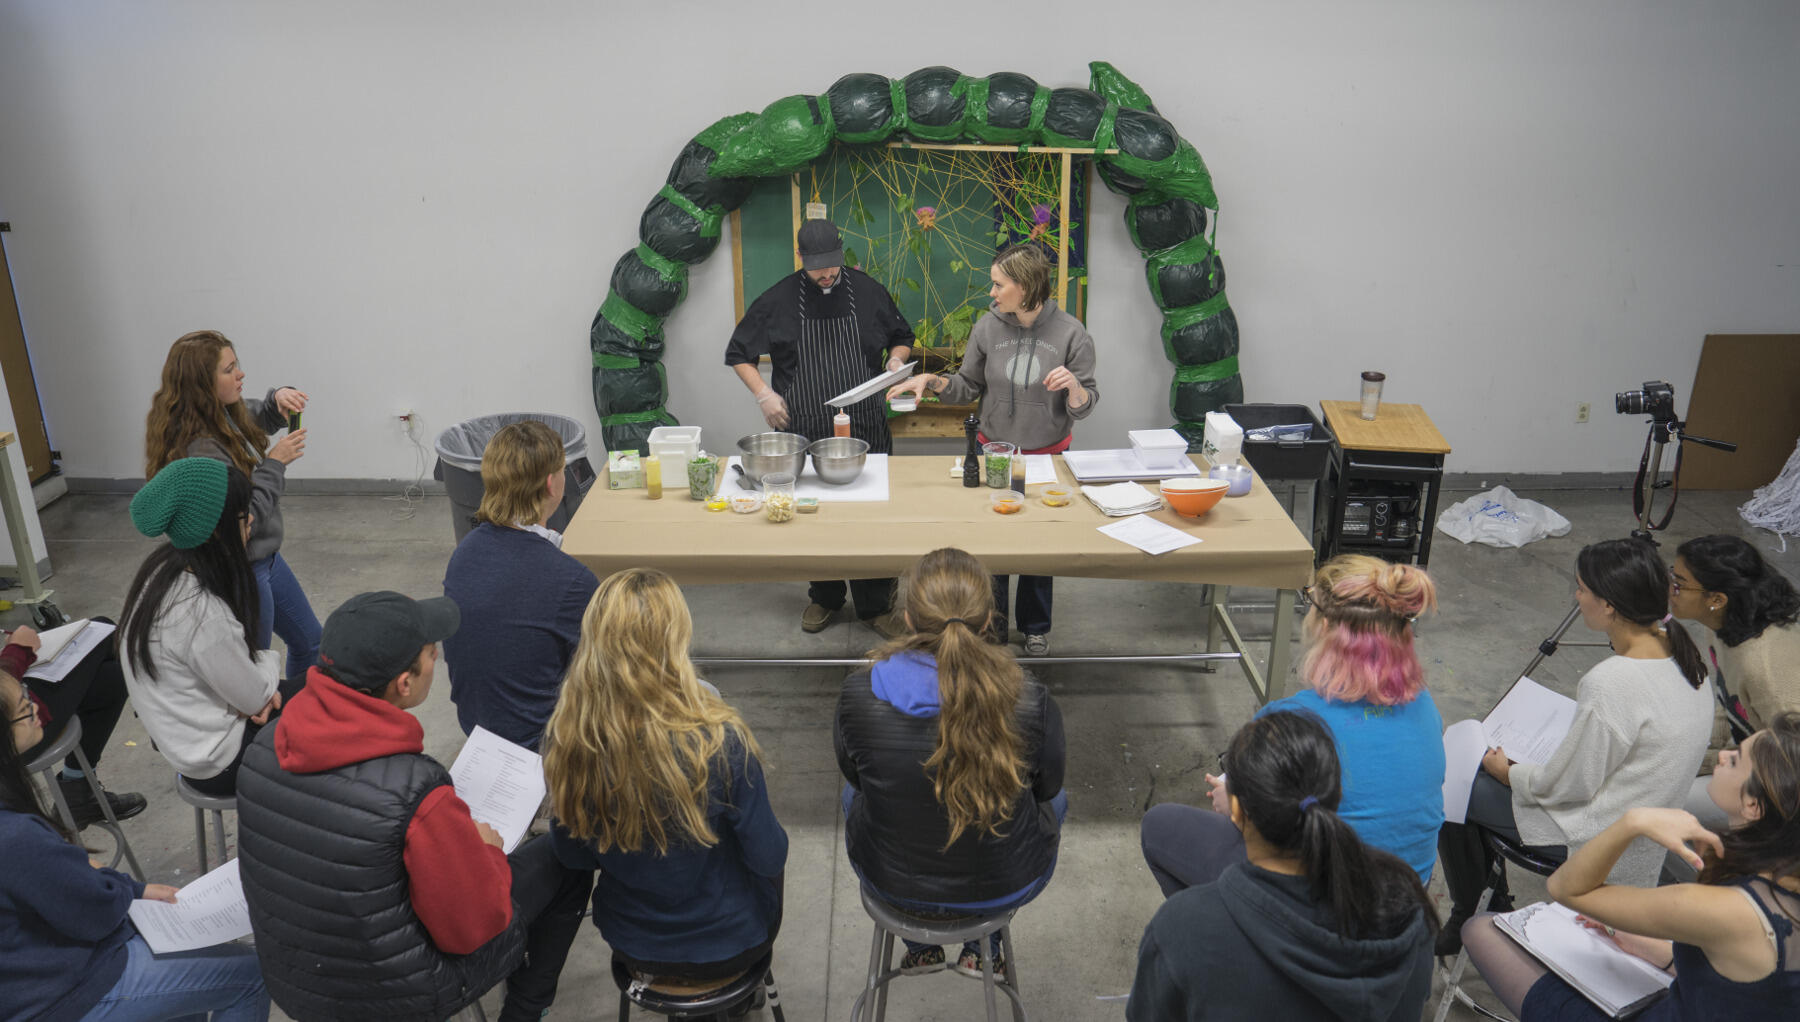 Greg Comstock and Lauren Jurk from The Naked Onion demonstrate the art of food preparation for arts students.